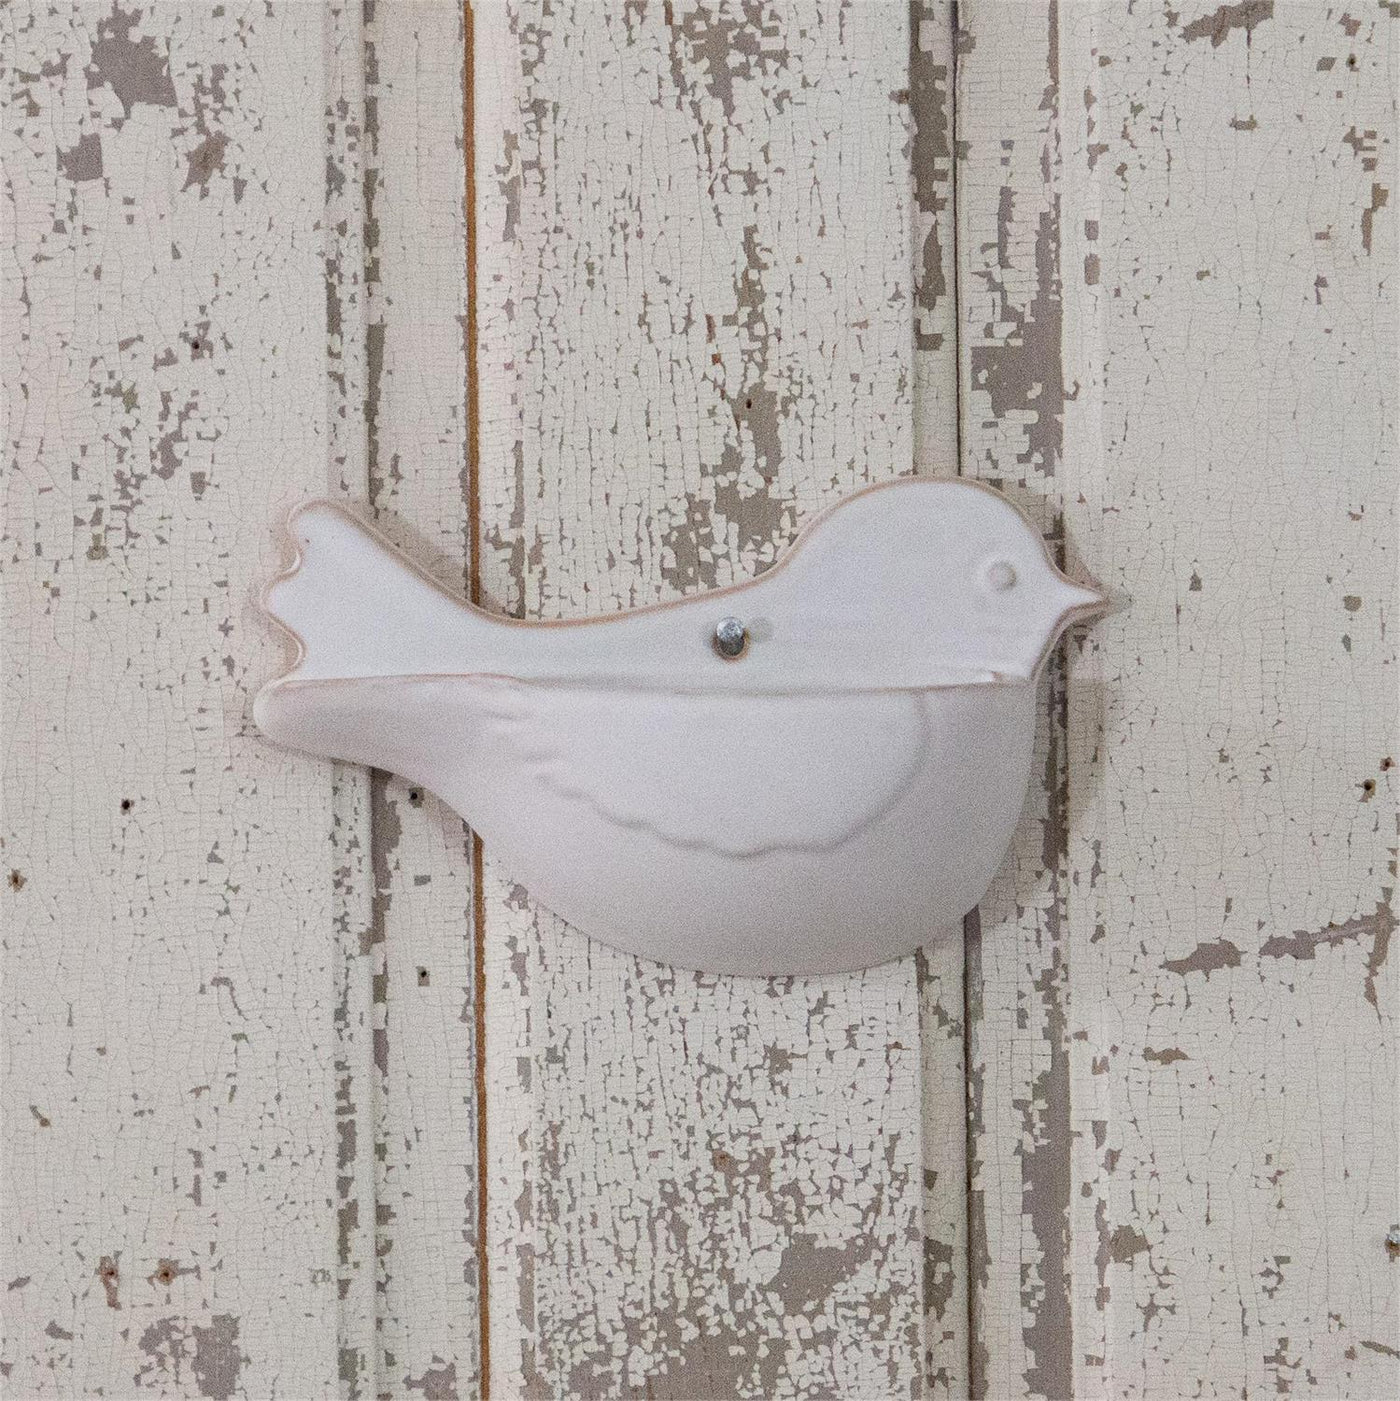 DAY 14 🐦 14 DAYS OF FEATHERED FRIENDS 🪺 Cottage Chic Bird Wall Pocket Stoneware